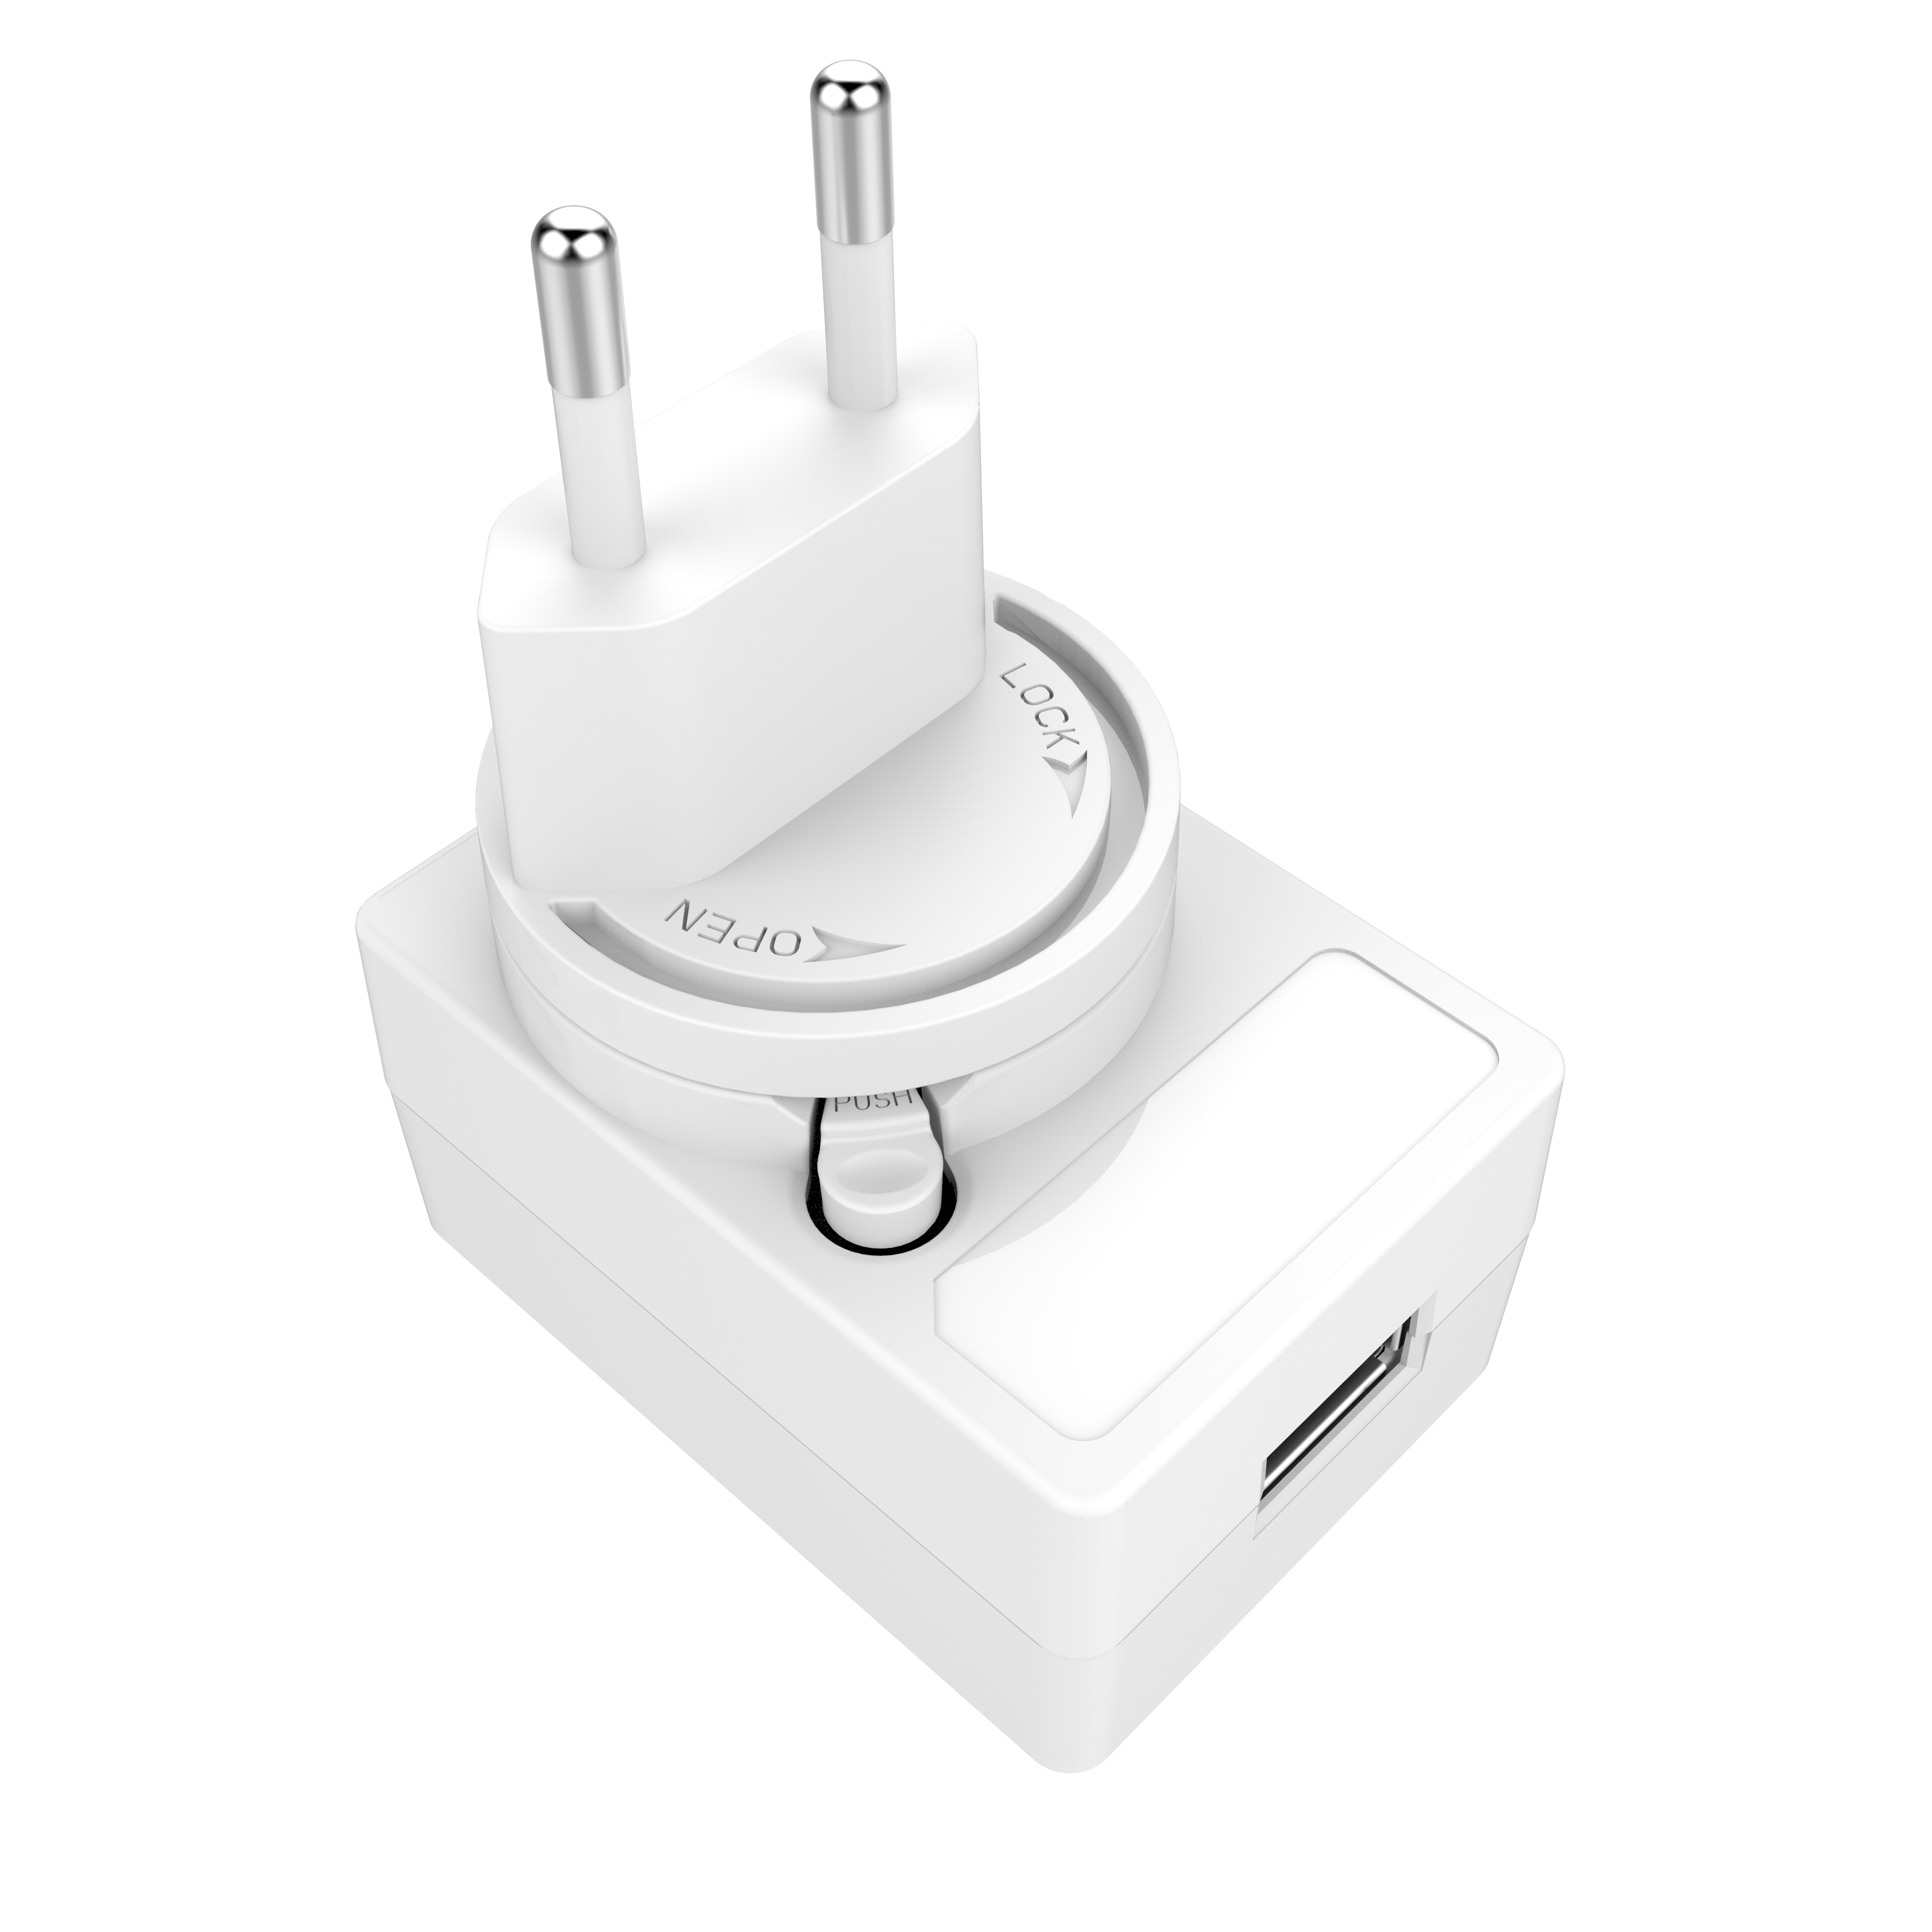 5V 2A 2.5A 3A BIS US EU UK AU PSE JP Plug Adapter SMPS Indian Switching Power Supply USB Adaptor ACDC Charger with ECAS ETL BIS